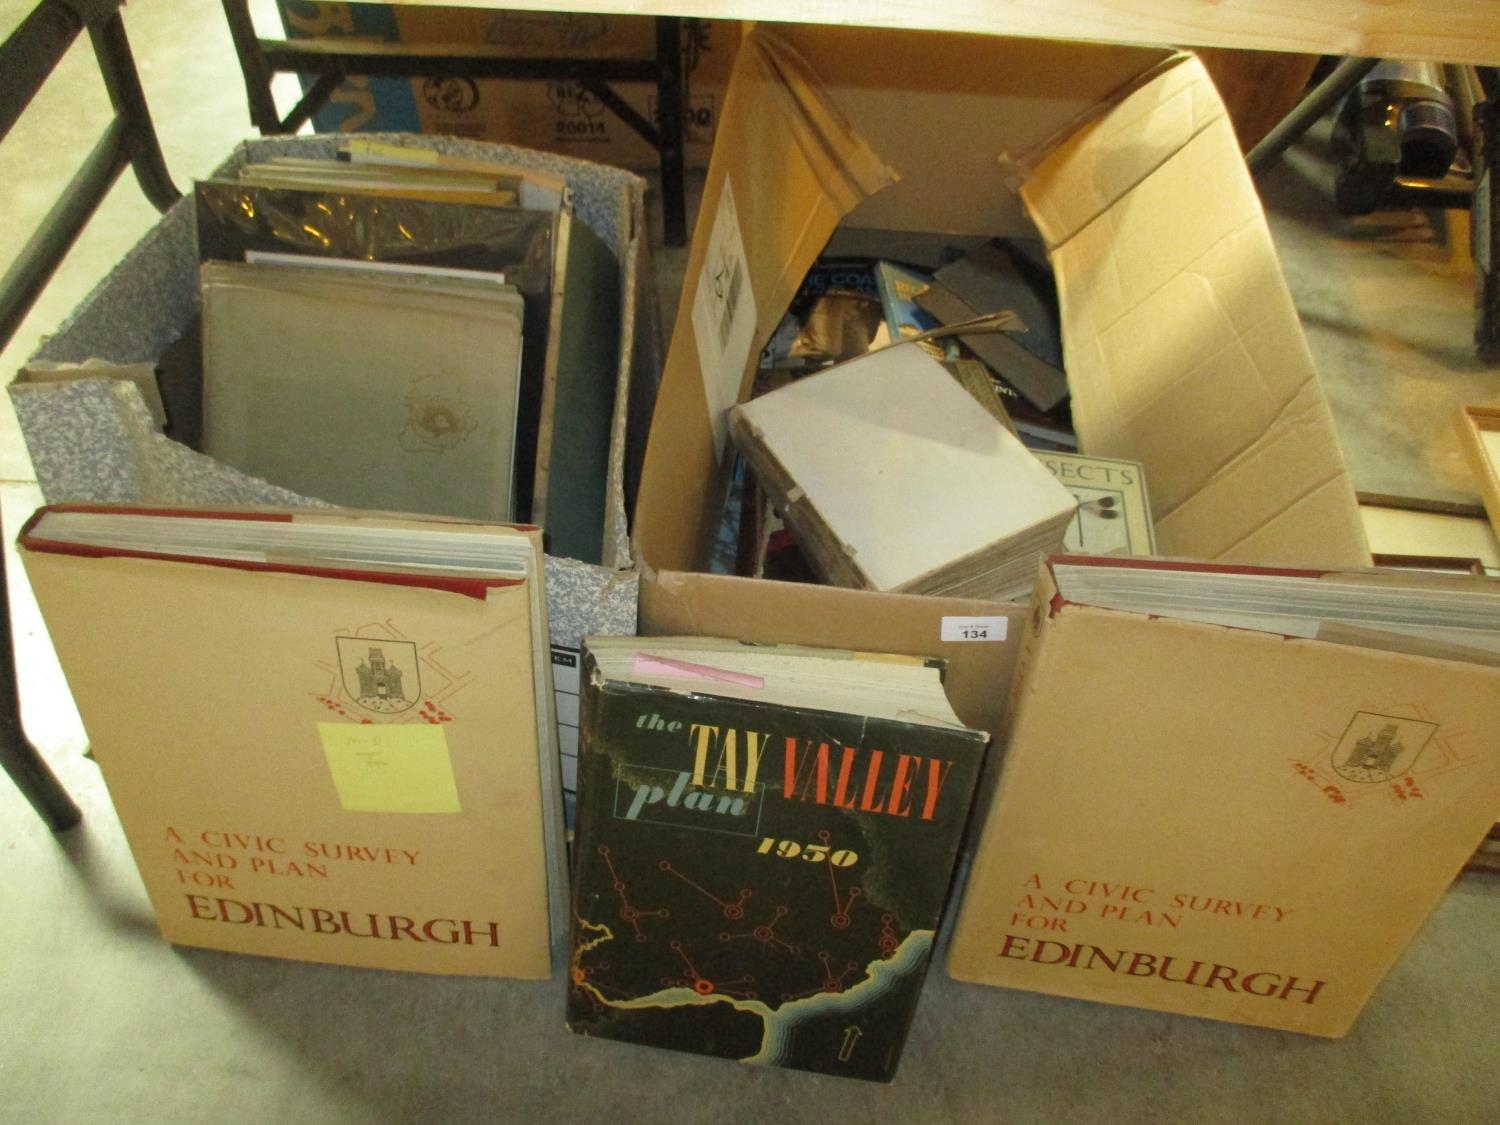 Two Boxes of Books including 2 Volumes A Civic Survey and Plan for Edinburgh, The Tay Valley Plan